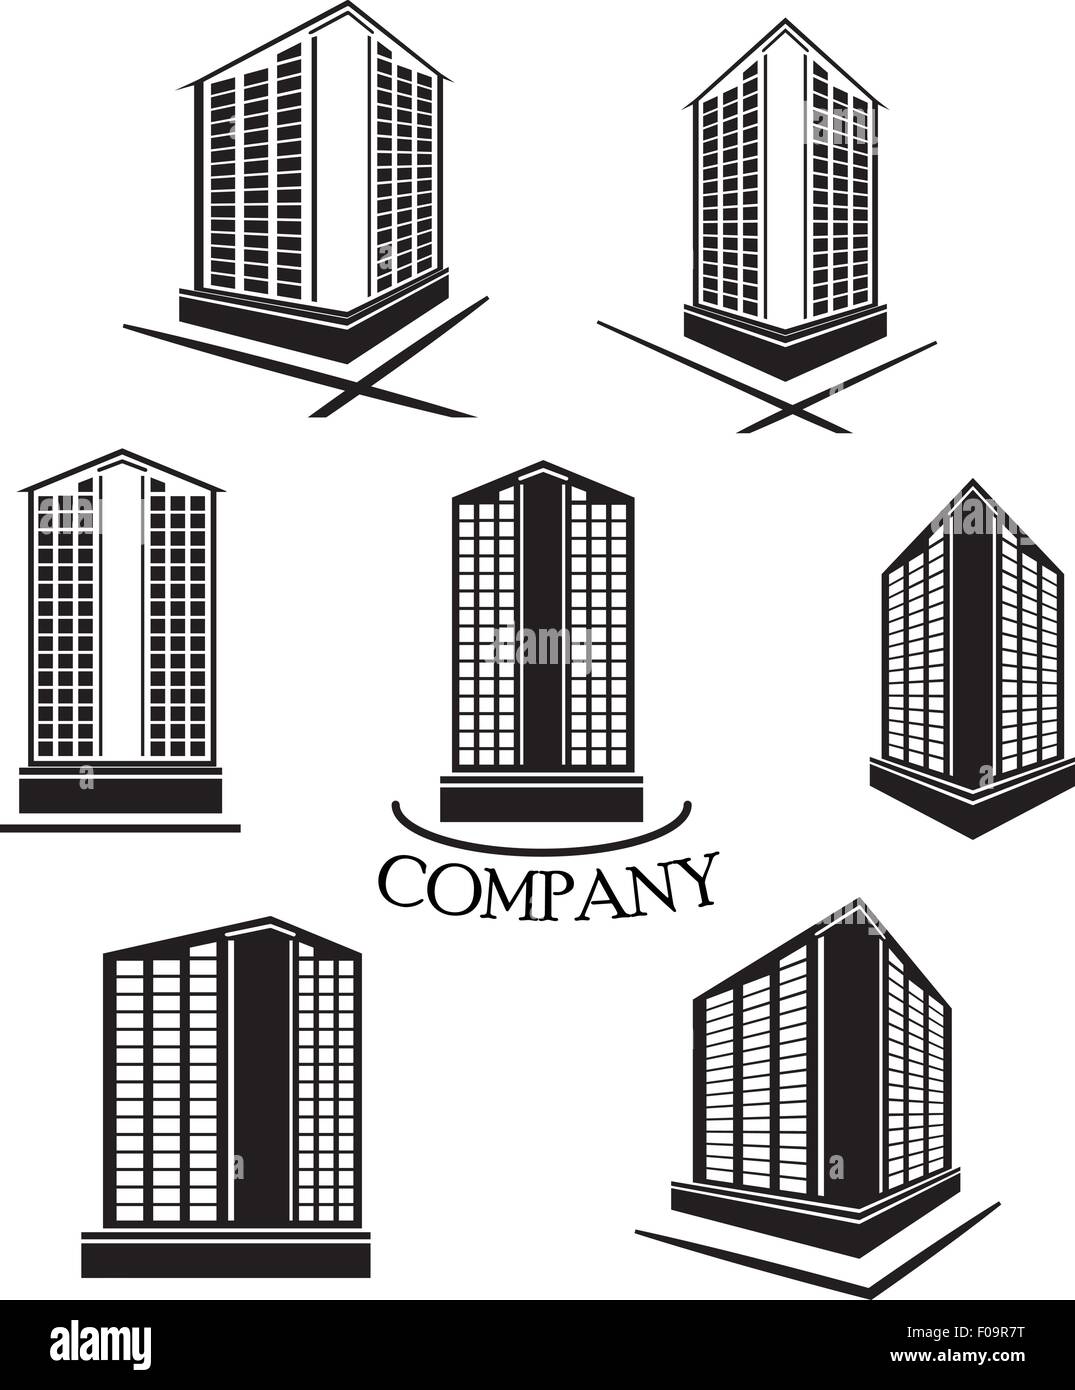 Set of Company building Vector logo and icon Stock Vector